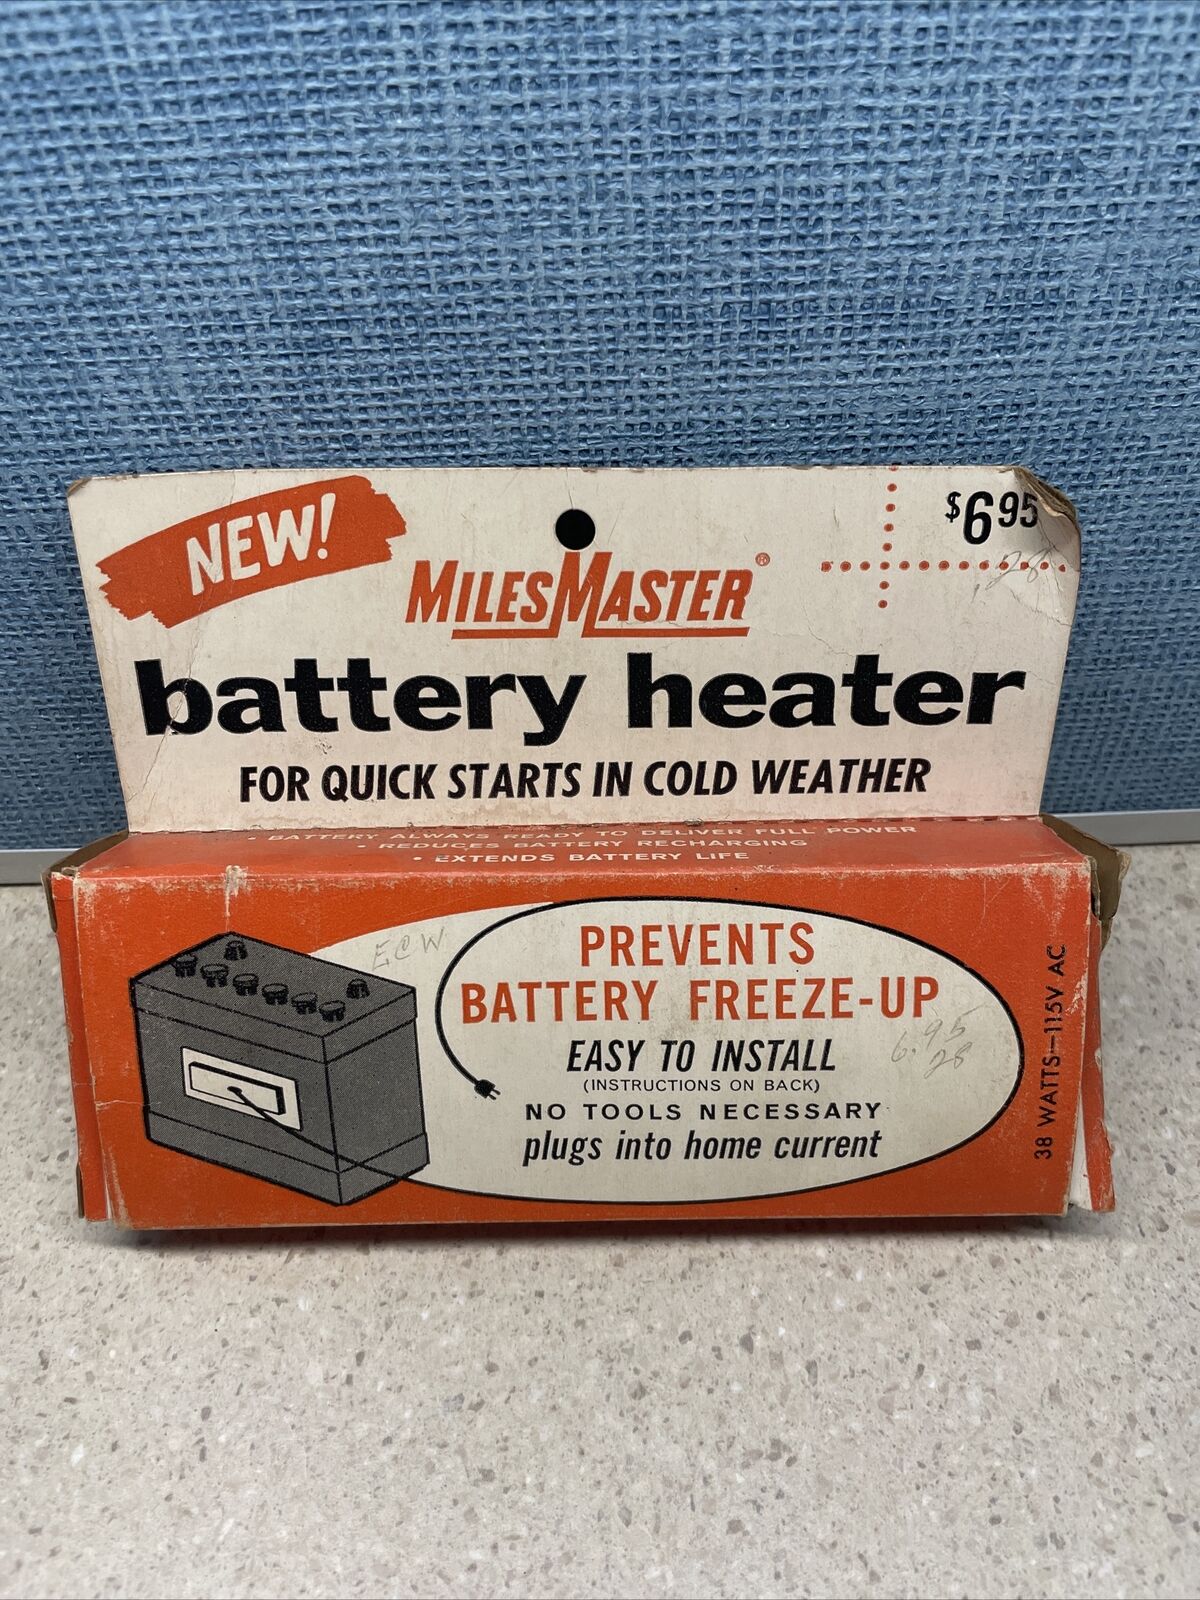 NOS Vintage MILES MASTER Car Truck Battery Heater Warmer with Box - Chevy Ford +